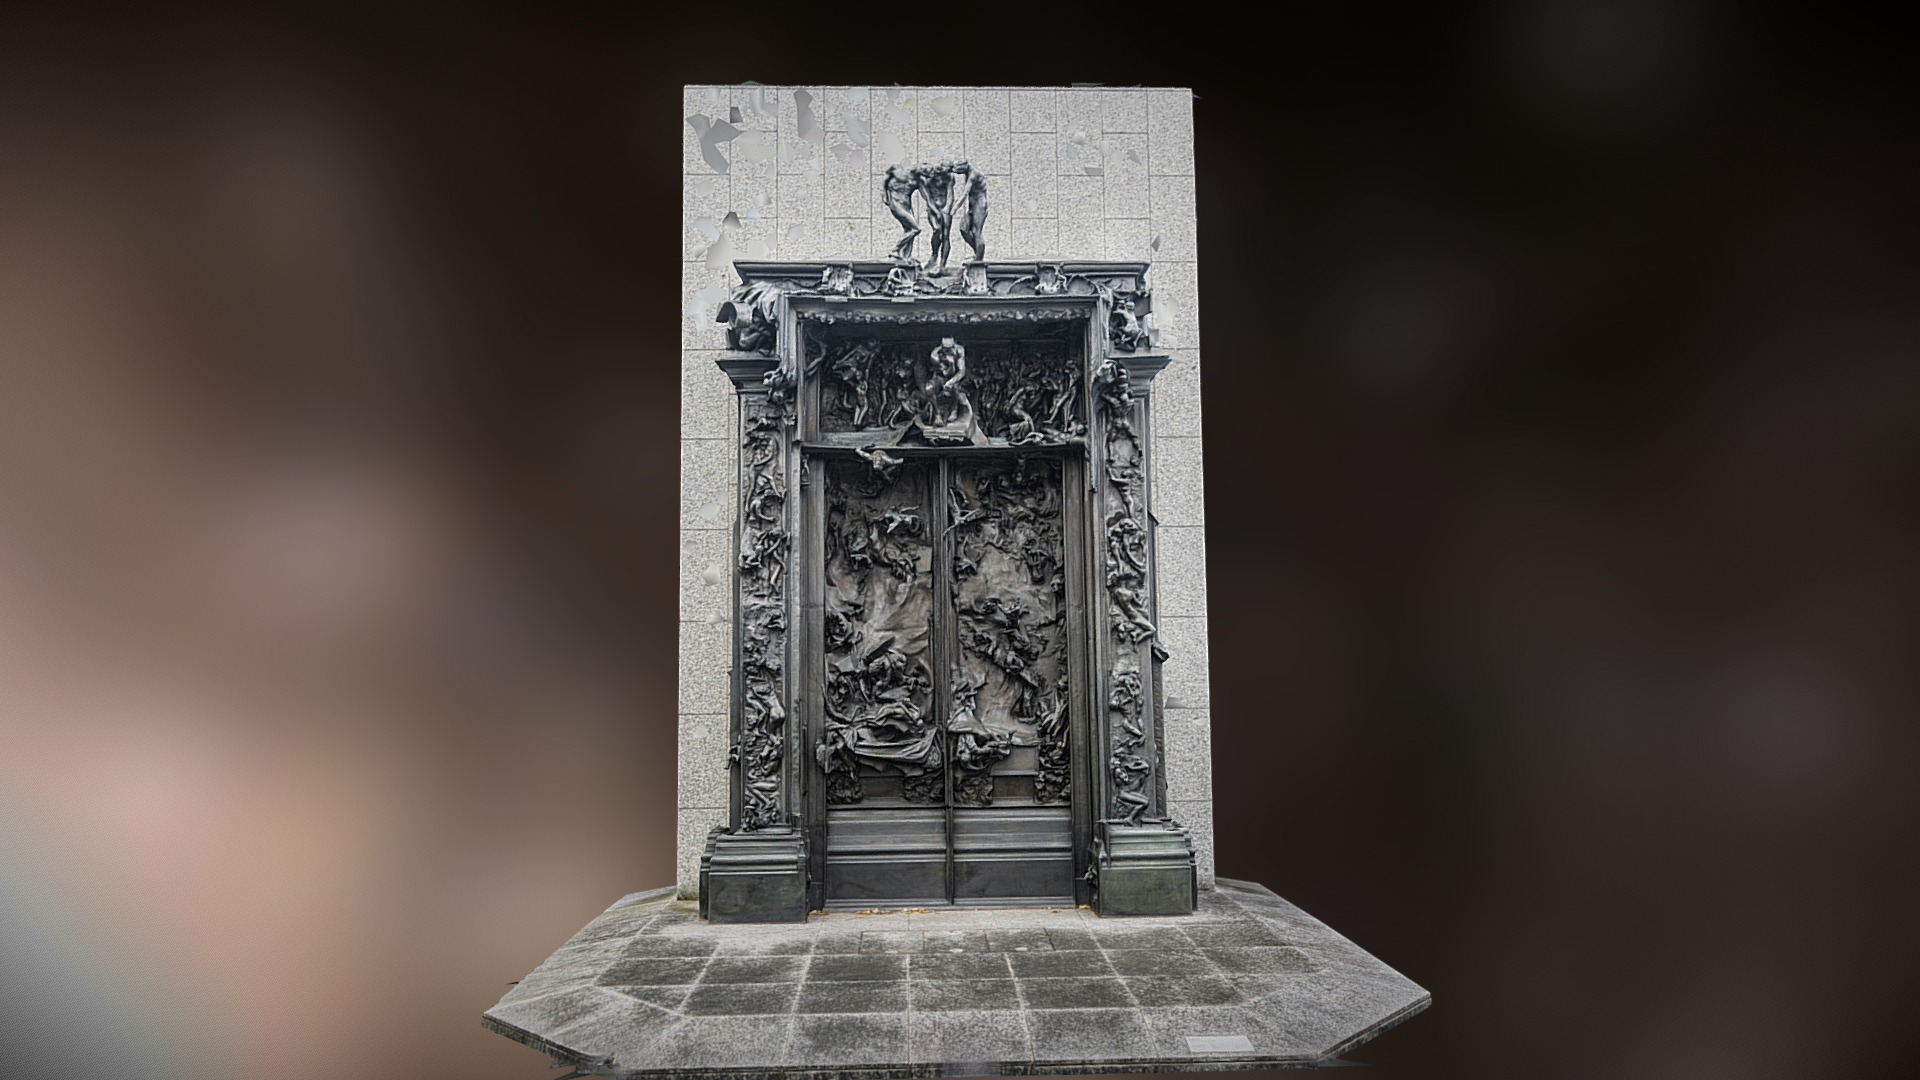 3D model The Gates of Hell photogrammetry scan 2019 - This is a 3D model of the The Gates of Hell photogrammetry scan 2019. The 3D model is about a wood door with carvings on it.